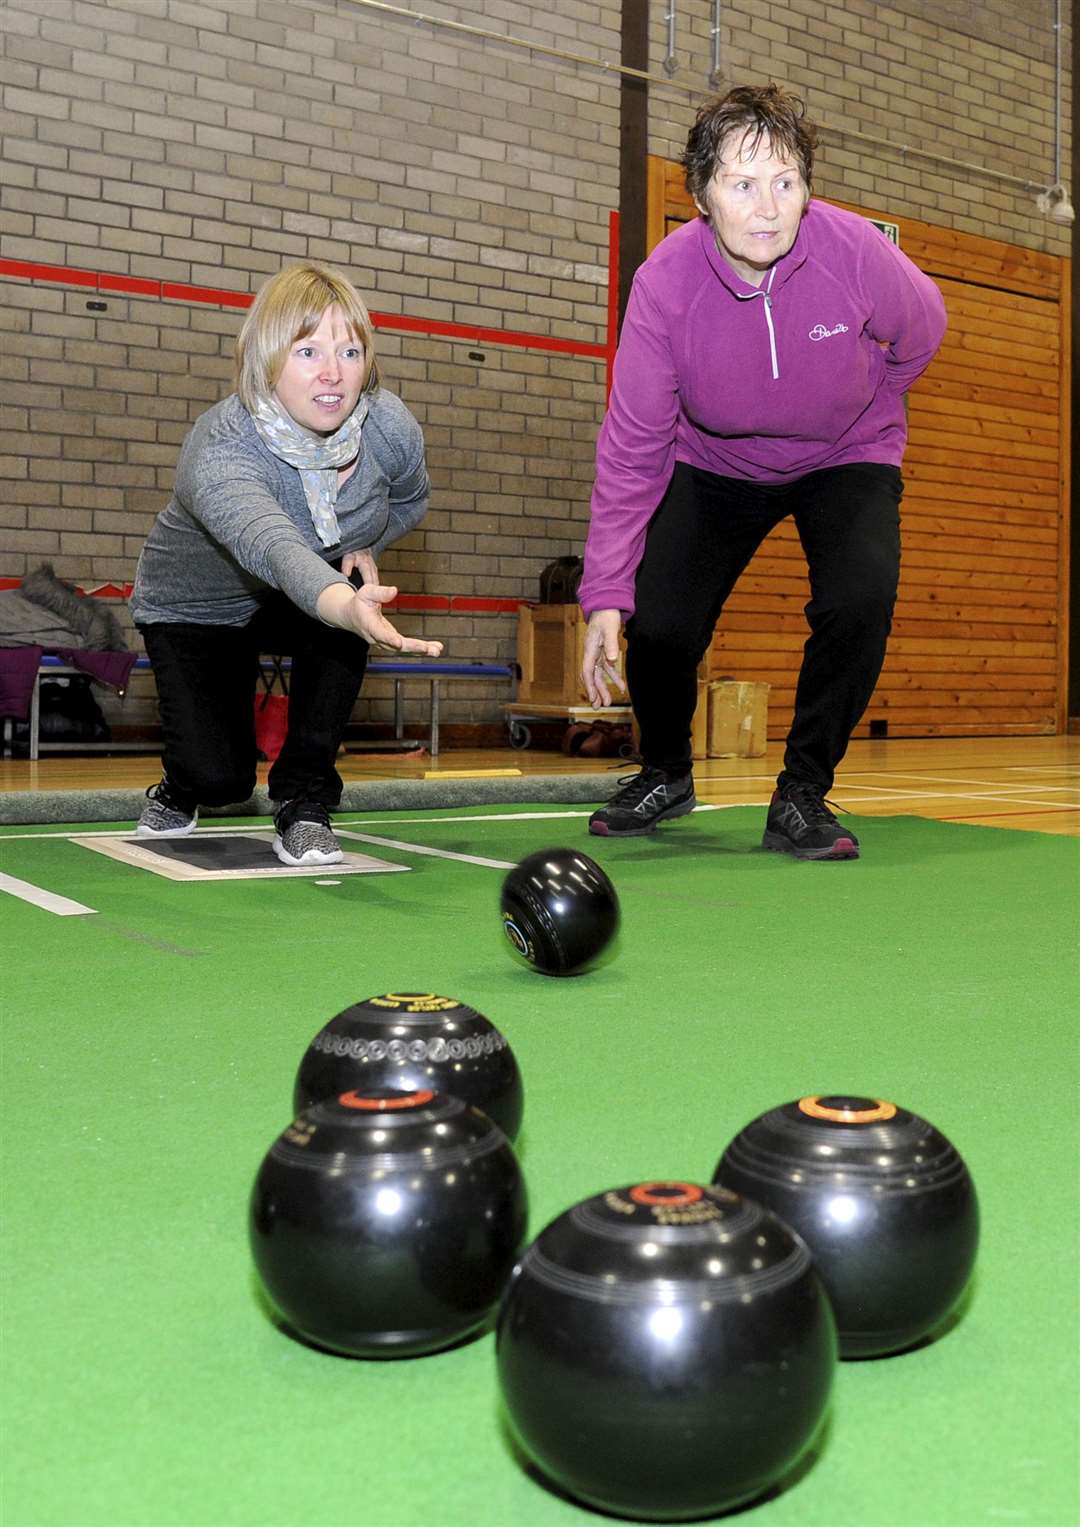 Sharon Finlay from active minds and Cllr Lorna Creswell taking part in the first free indoor bowling session at the Forres Community Centre. Picture: Eric Cormack